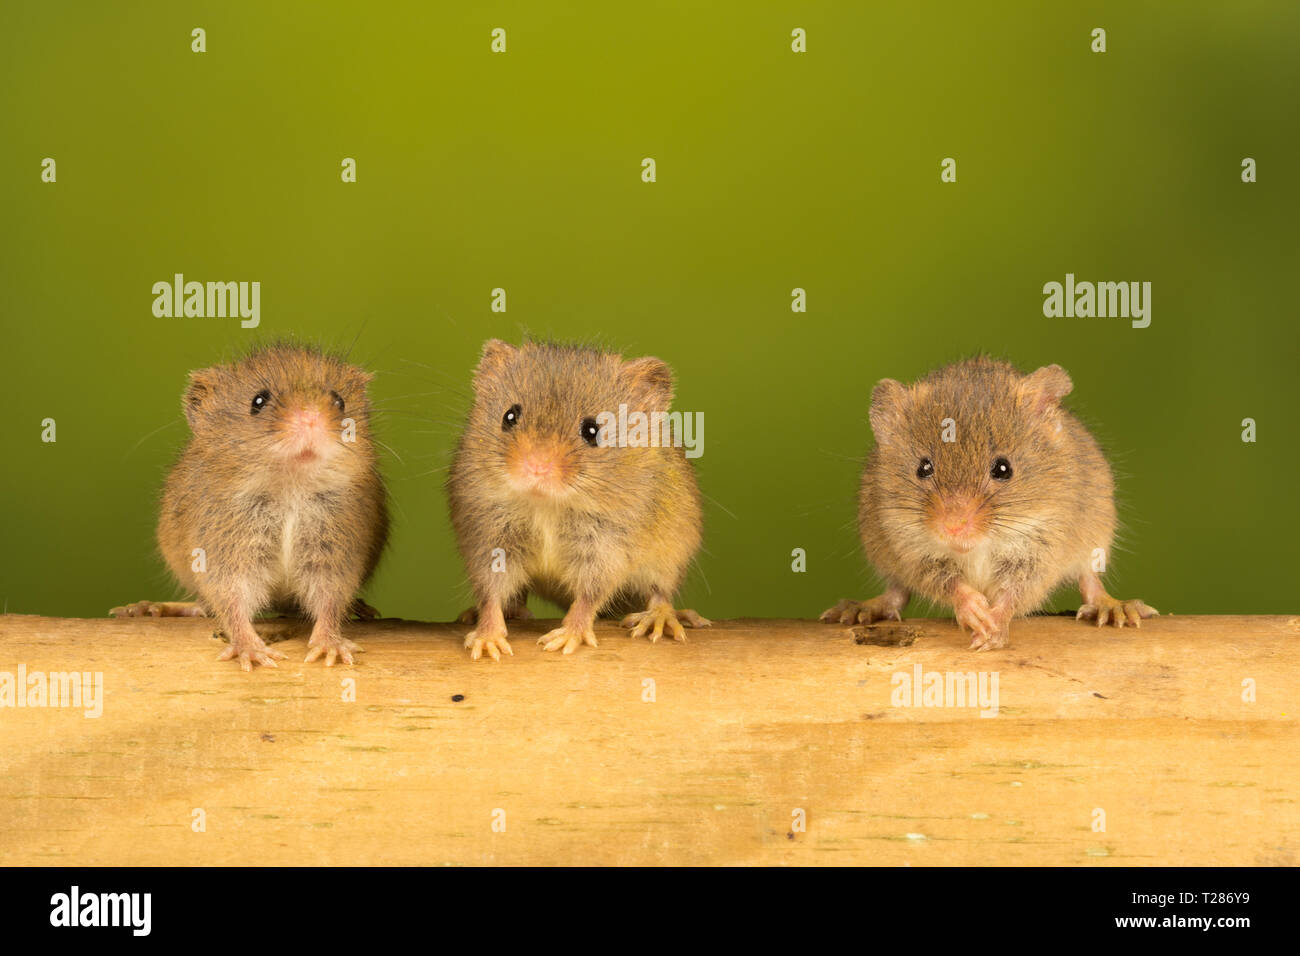 Three harvest mice (Micromys minutus), a small mammal or rodent species, in a row looking forwards. Cute furry animals, quirky, humorous Stock Photo